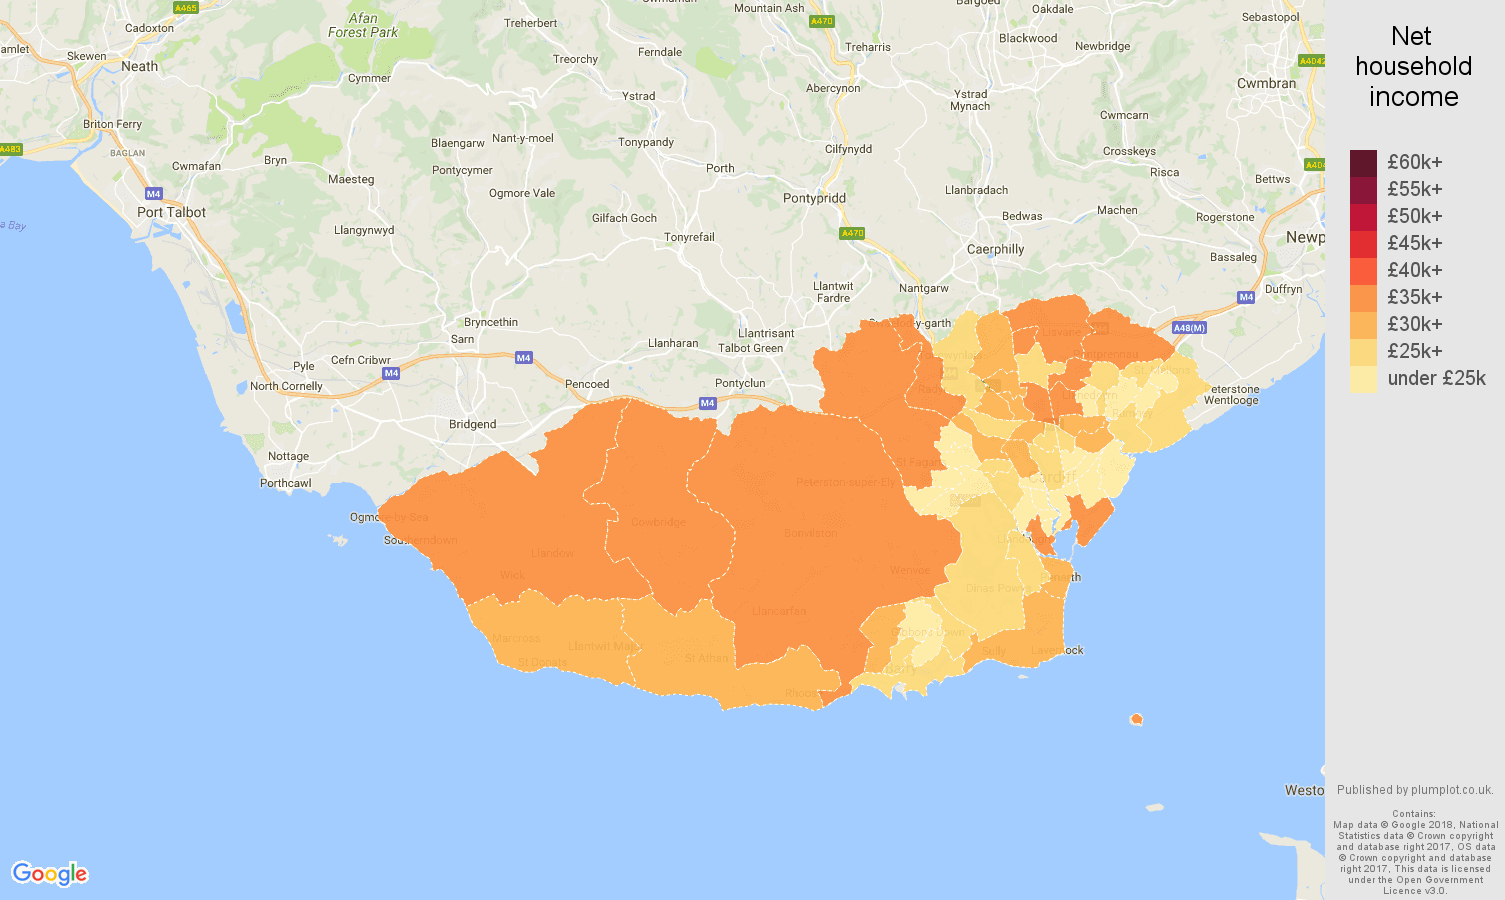 South Glamorgan net household income map